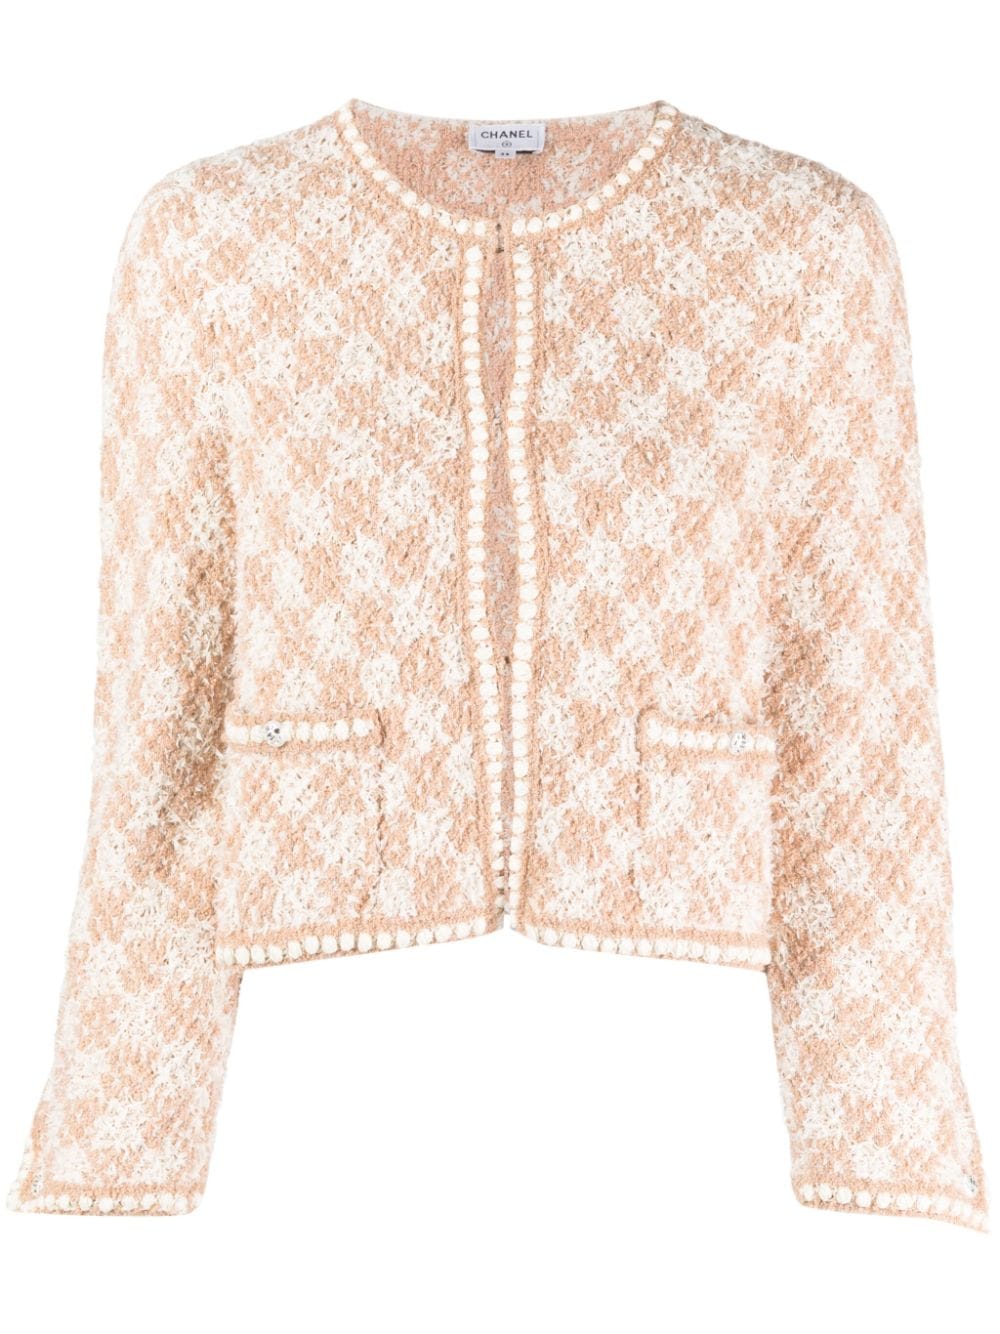 CHANEL Pre-Owned Tweed Cropped Jacket - Farfetch